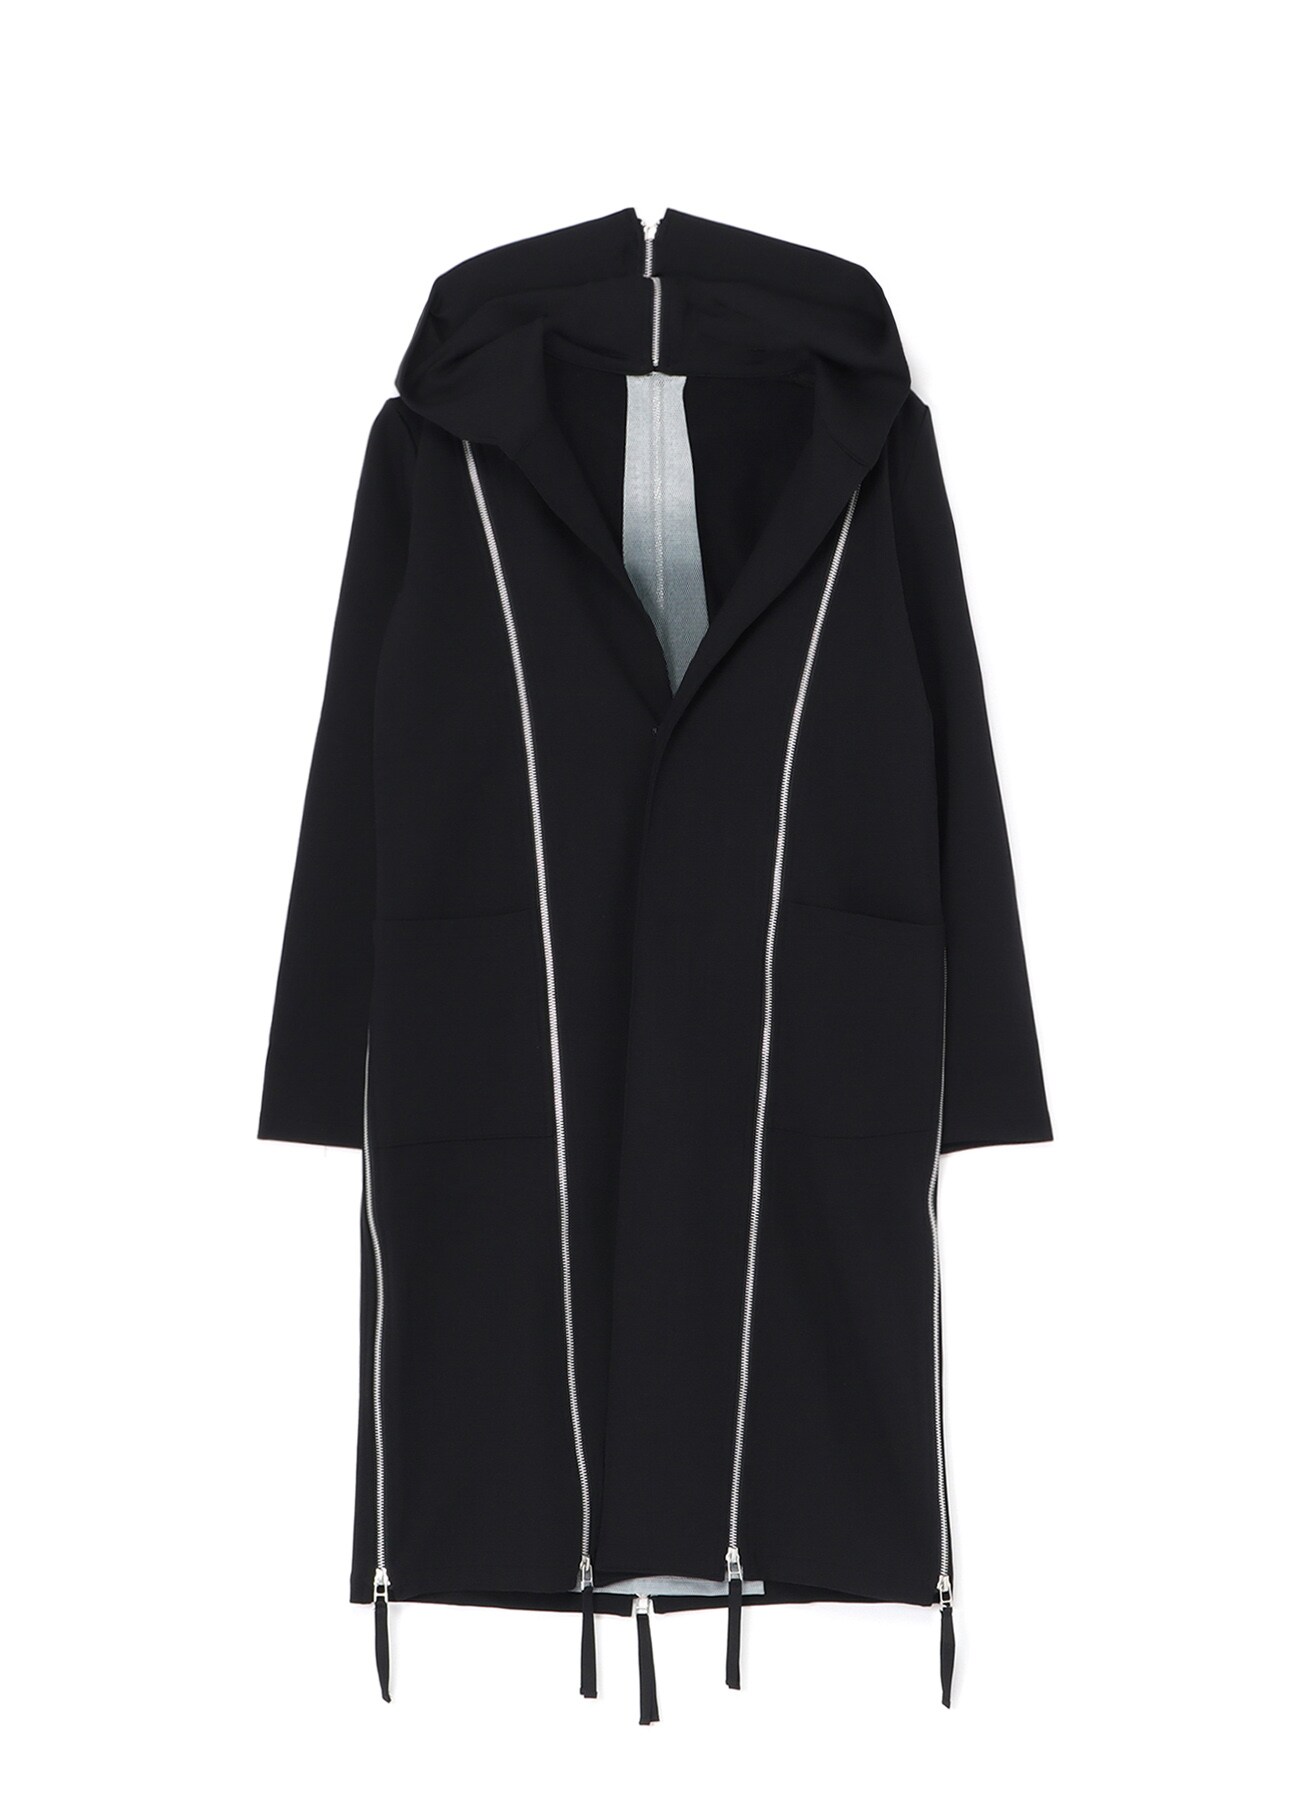 PONTE ROMA COAT WITH MULTIPLE ZIPPERS